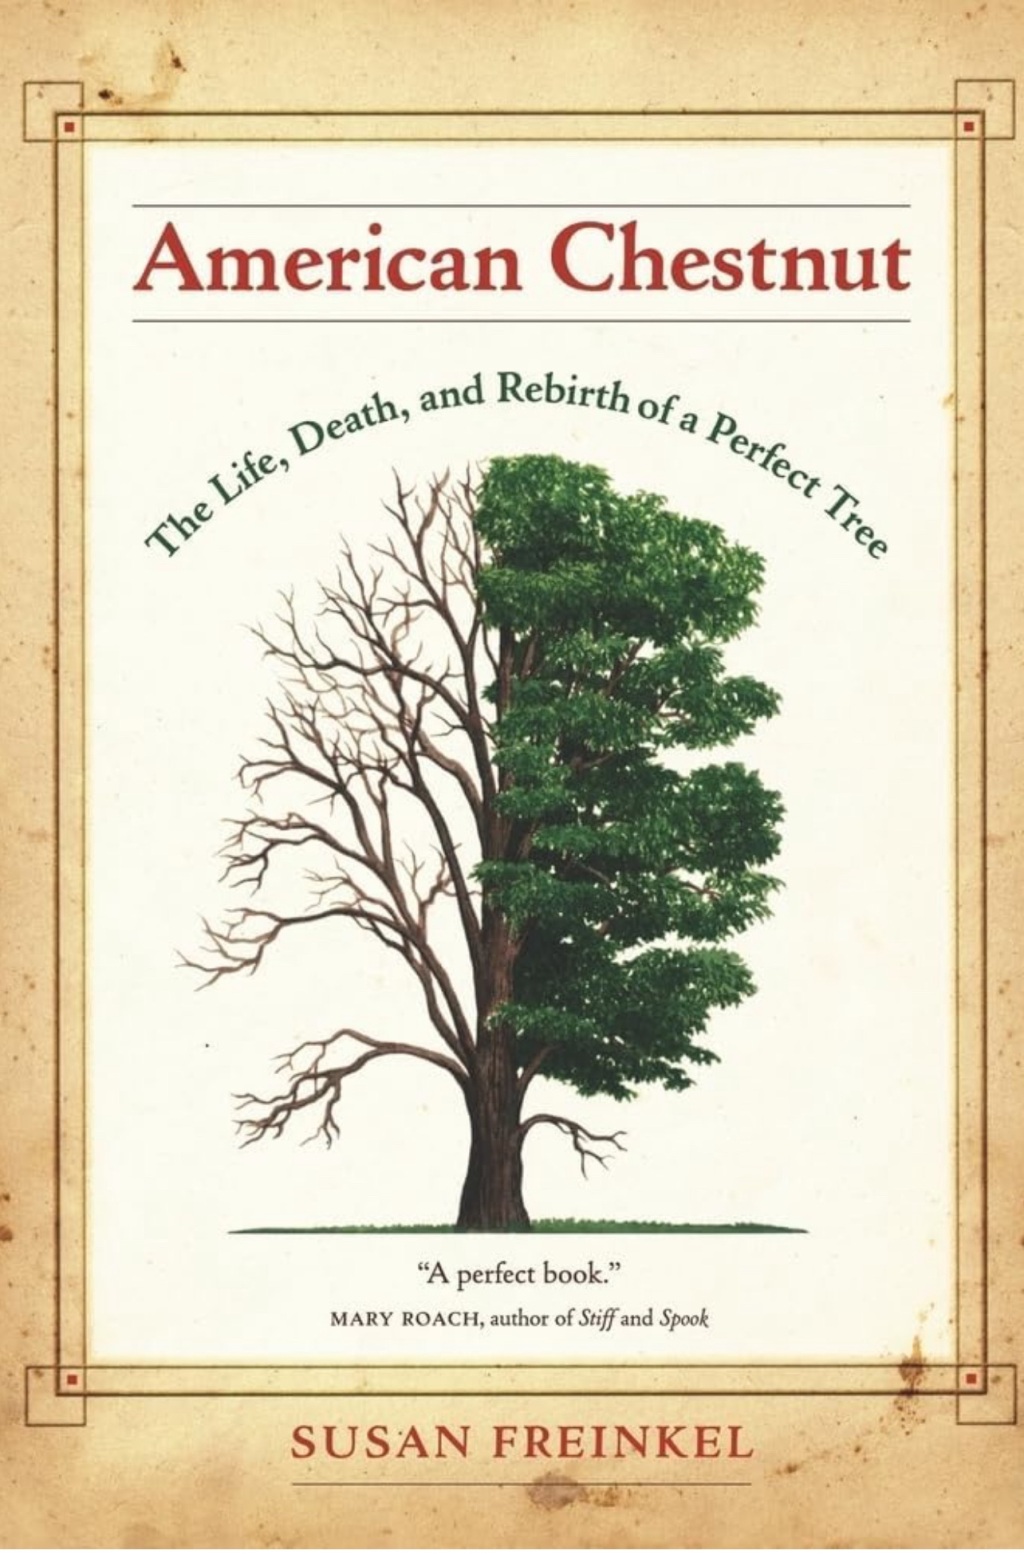 American Chestnut: The Life, Death, and Rebirth of a Perfect Tree